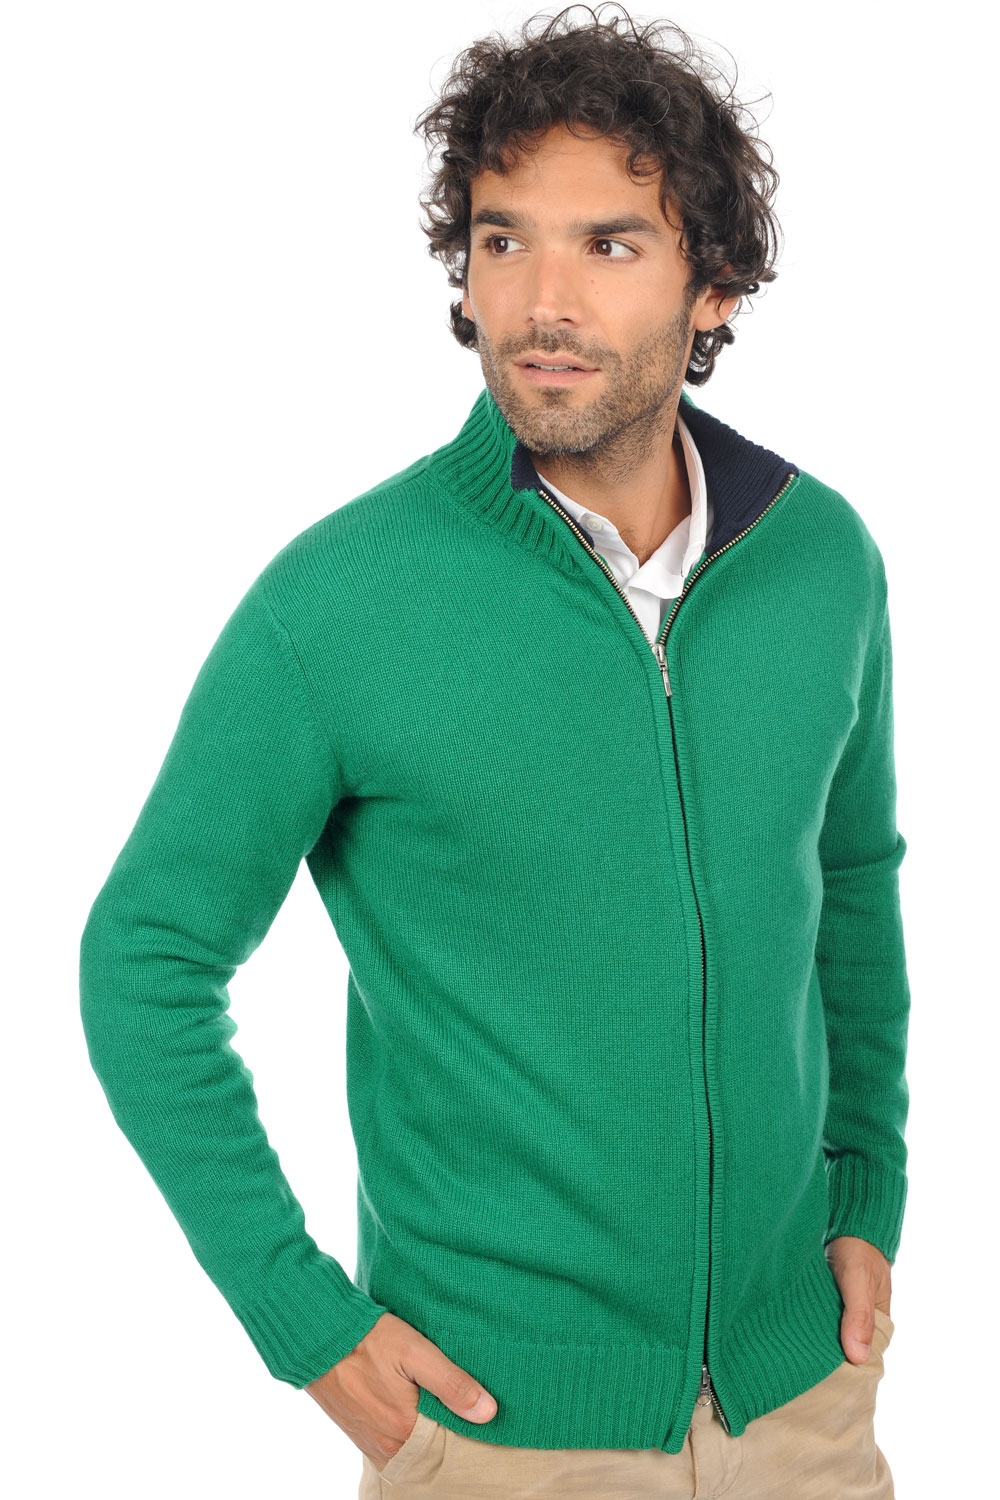 Cachemire pull homme maxime vert anglais marine fonce m